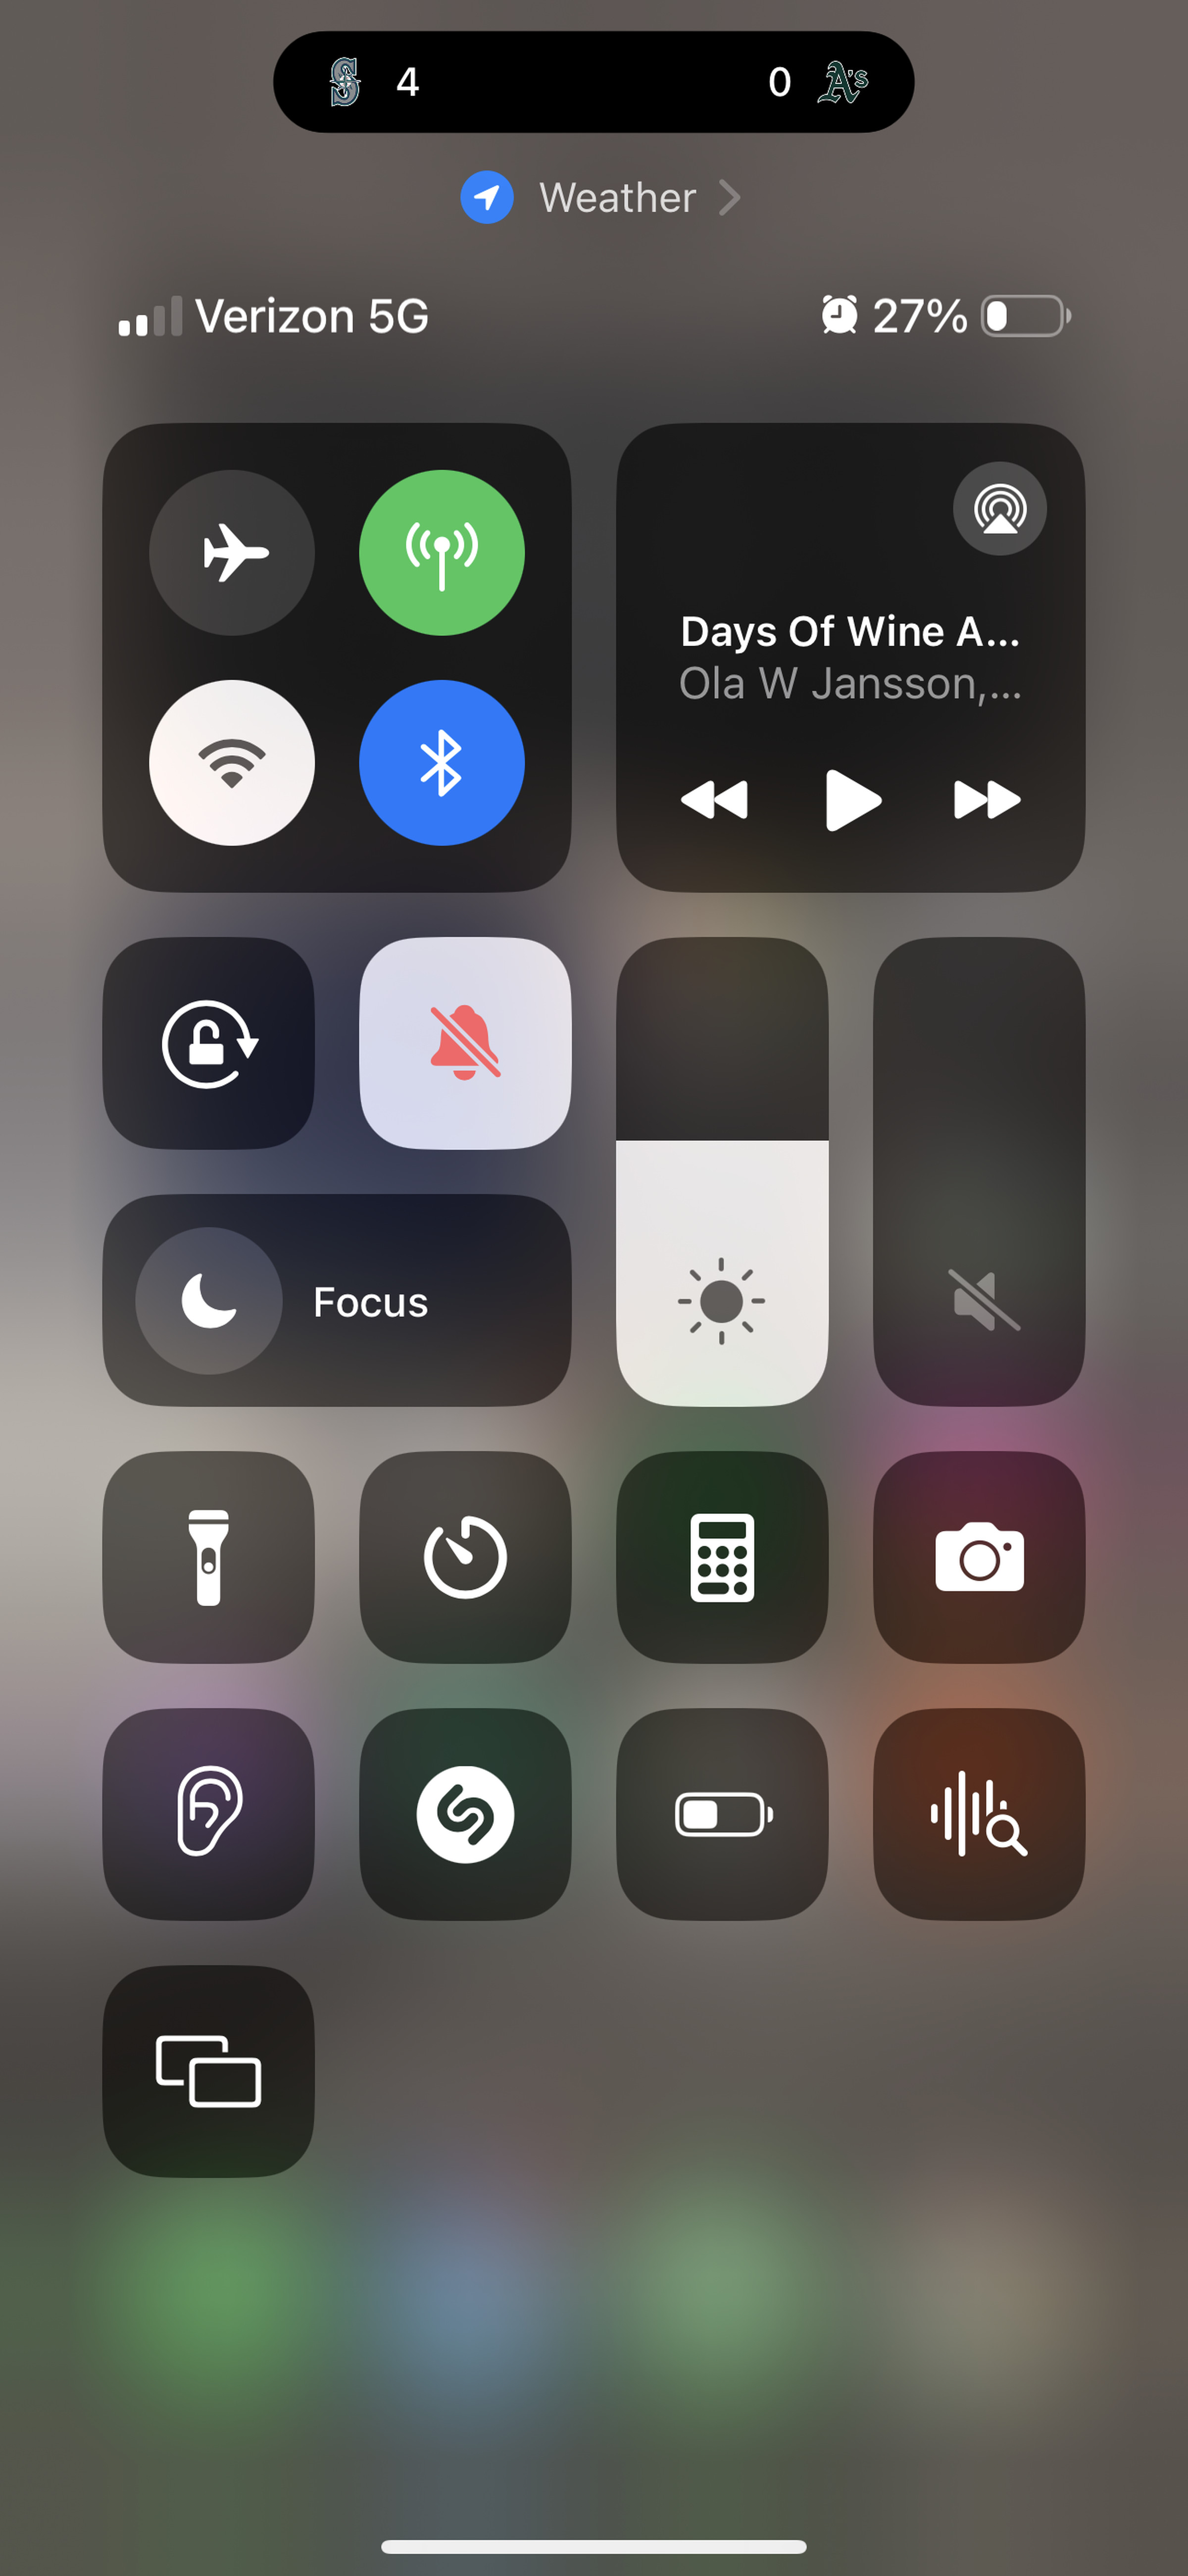 A mute icon appears in control center now.